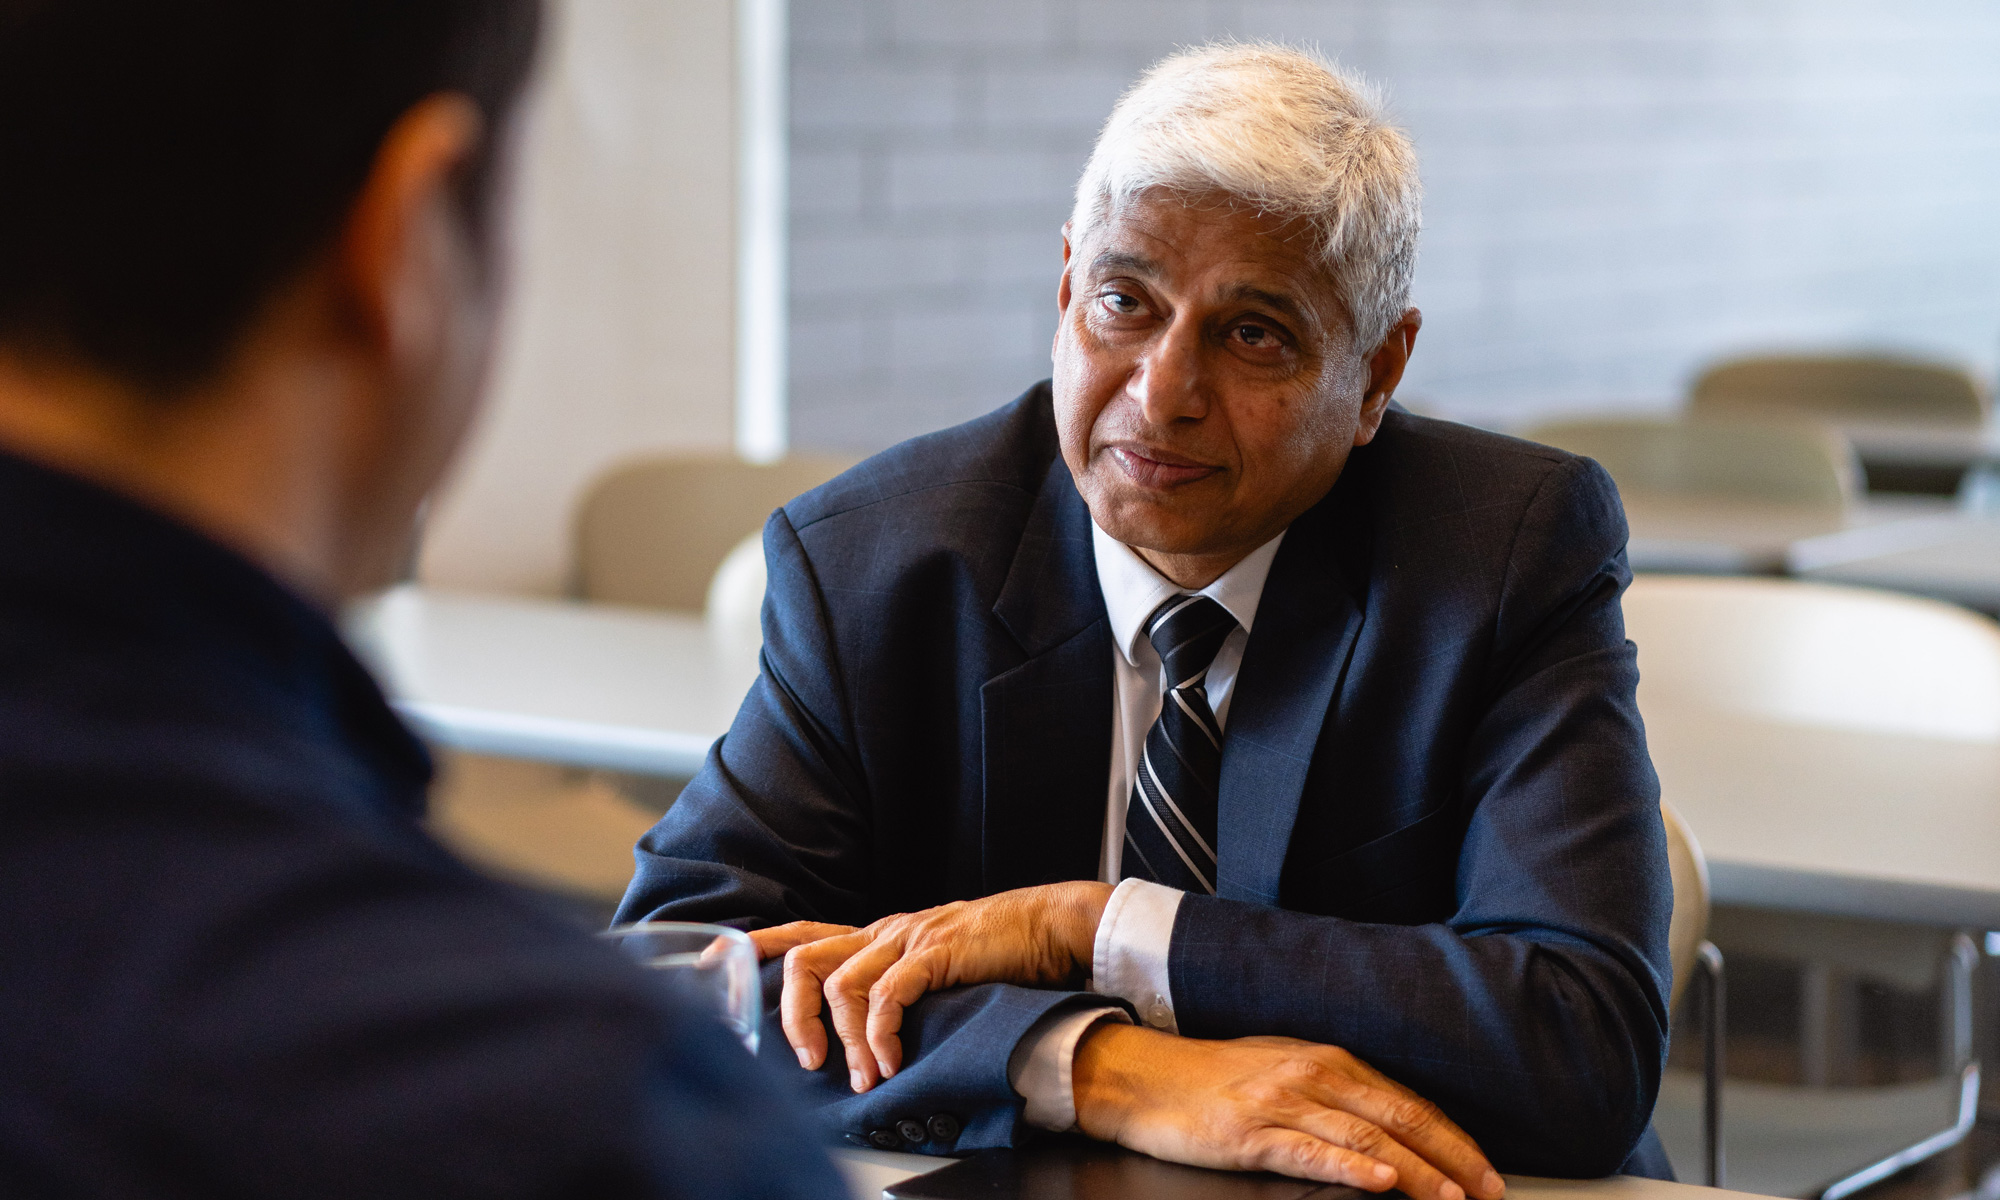 Vikas Swarup sitting with arms placed on top of each other, engaged in listening to someone speaking with him.